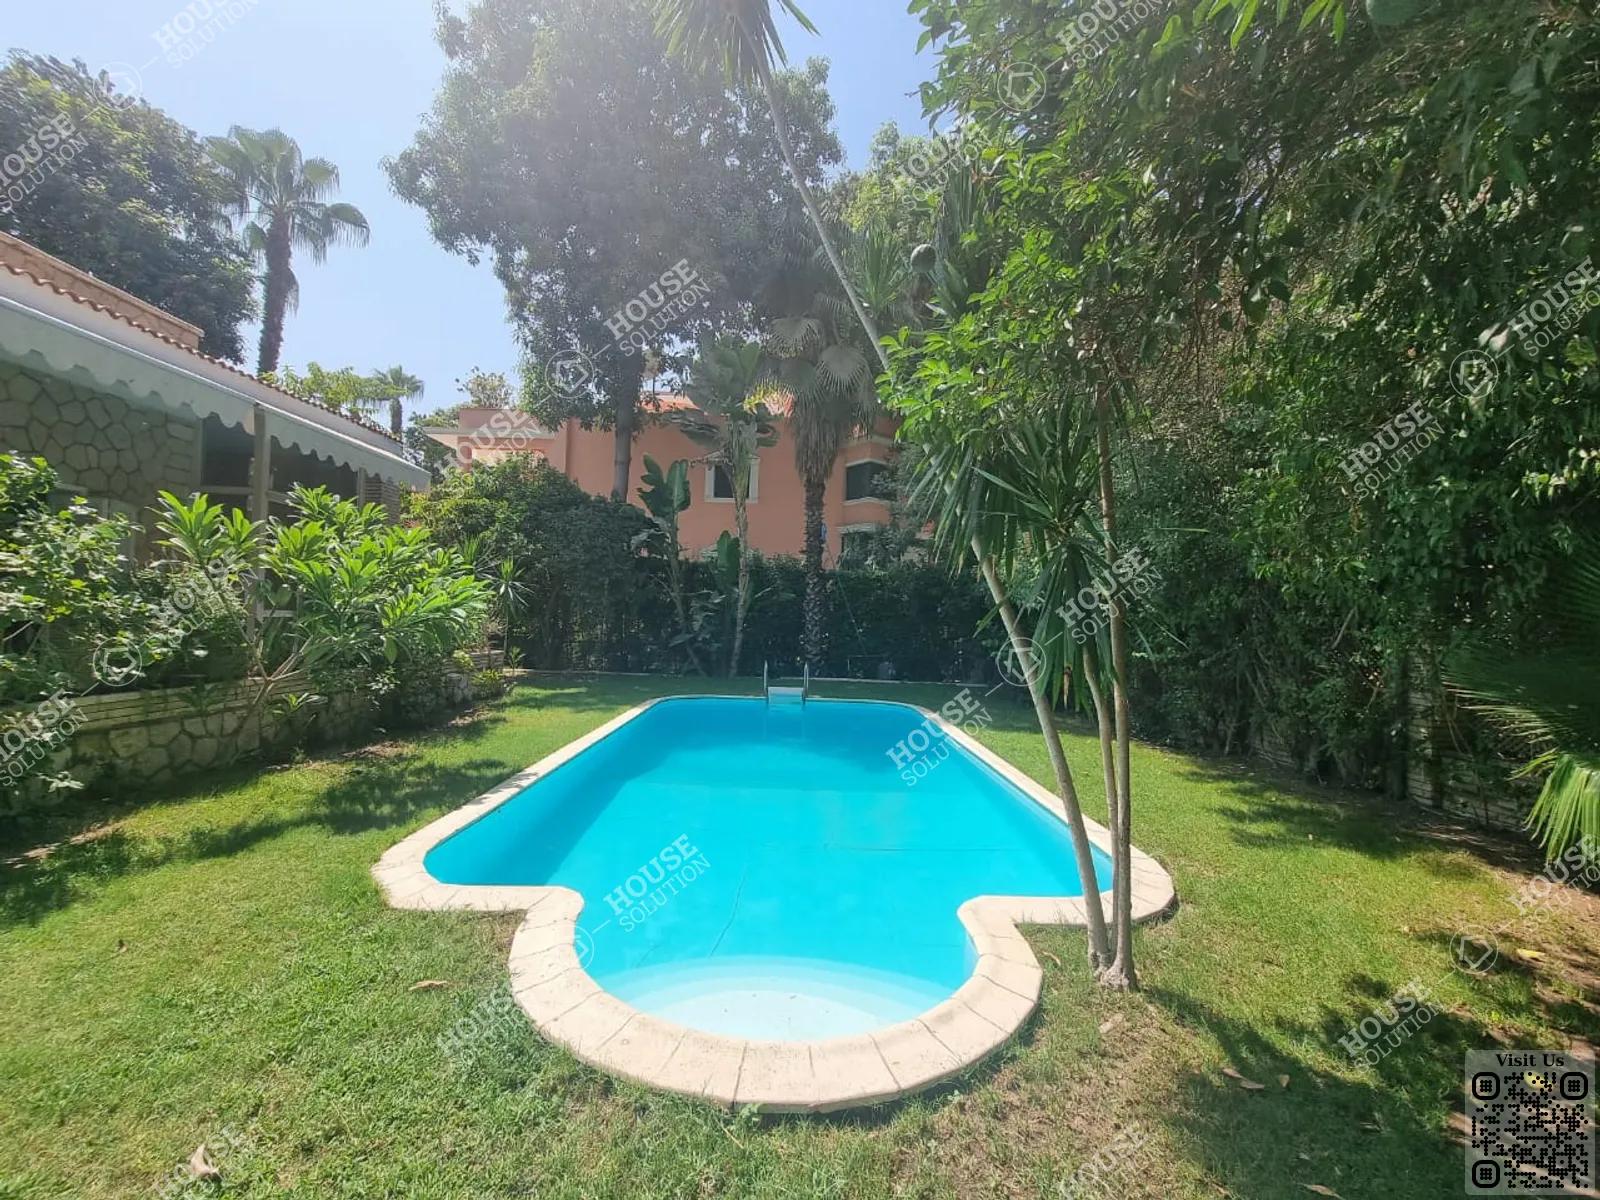 PRIVATE SWIMMING POOL  @ Villas For Rent In Maadi Old Maadi Area: 1000 m² consists of 3 Bedrooms 4 Bathrooms Semi furnished 5 stars #5118-1